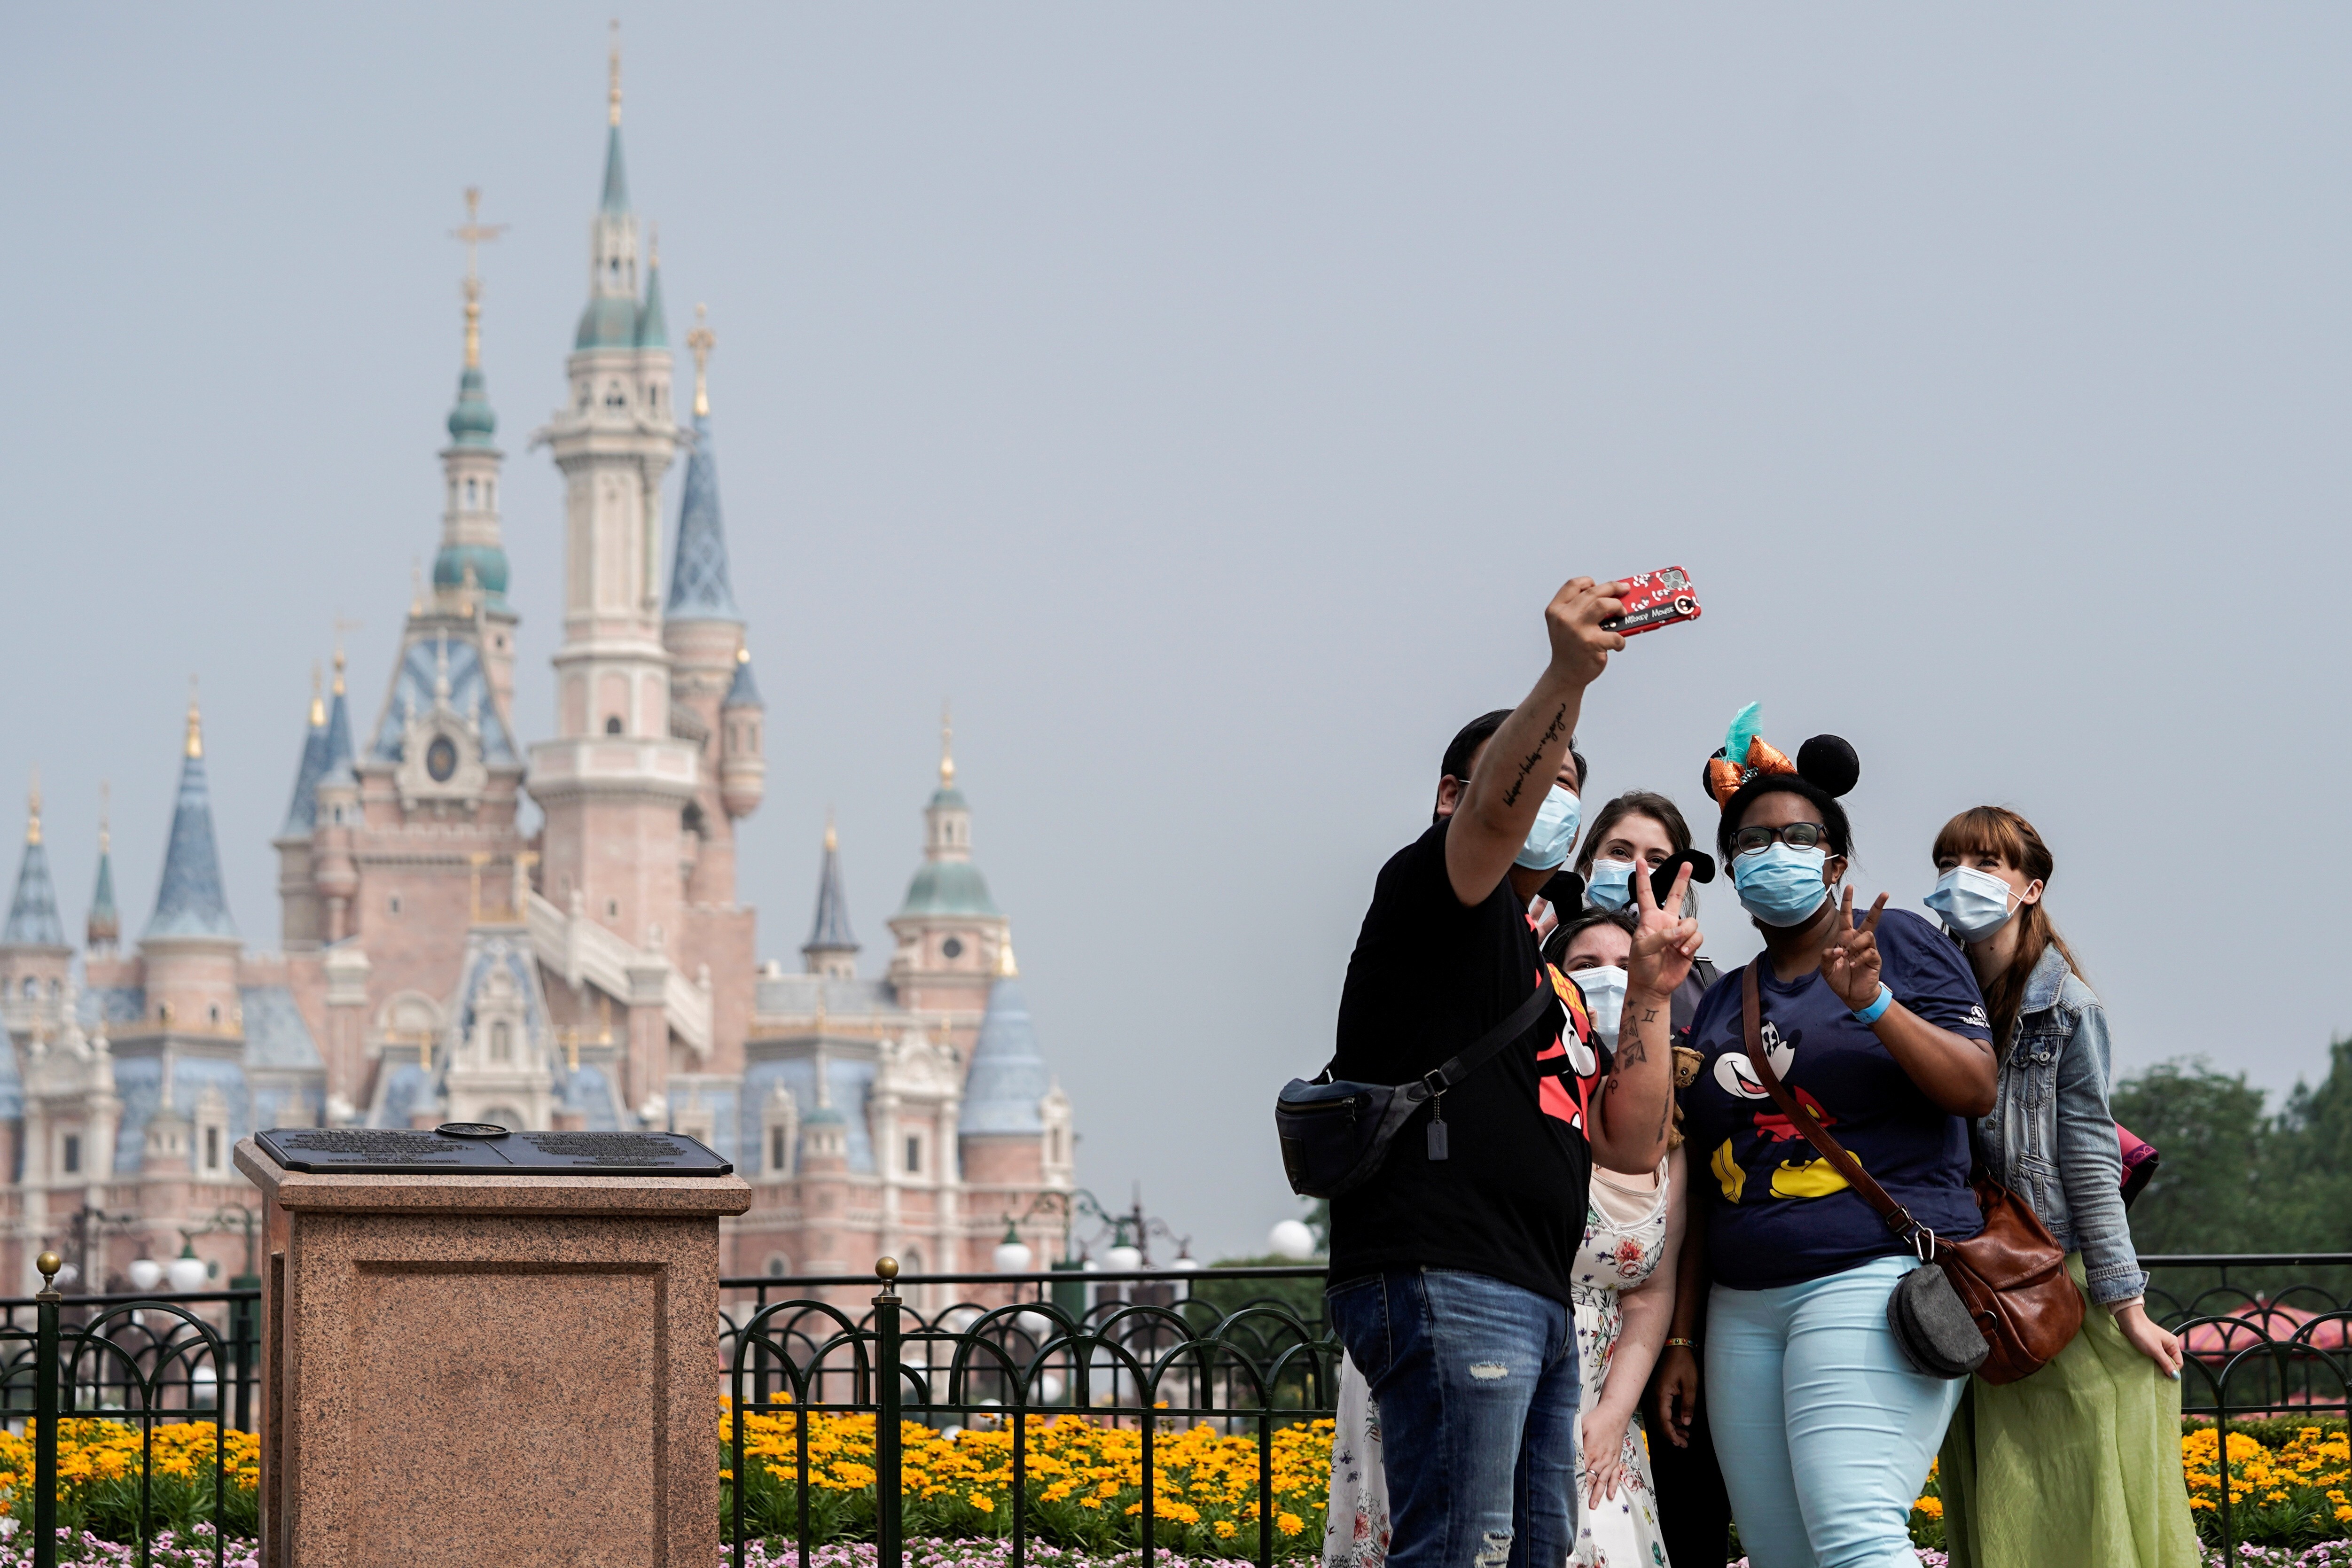 Shanghai Disneyland shut down on Sunday after it was linked to a Covid-19 case. It announced it would be closed on Monday and Tuesday but did not say when it would reopen. Photo: Reuters